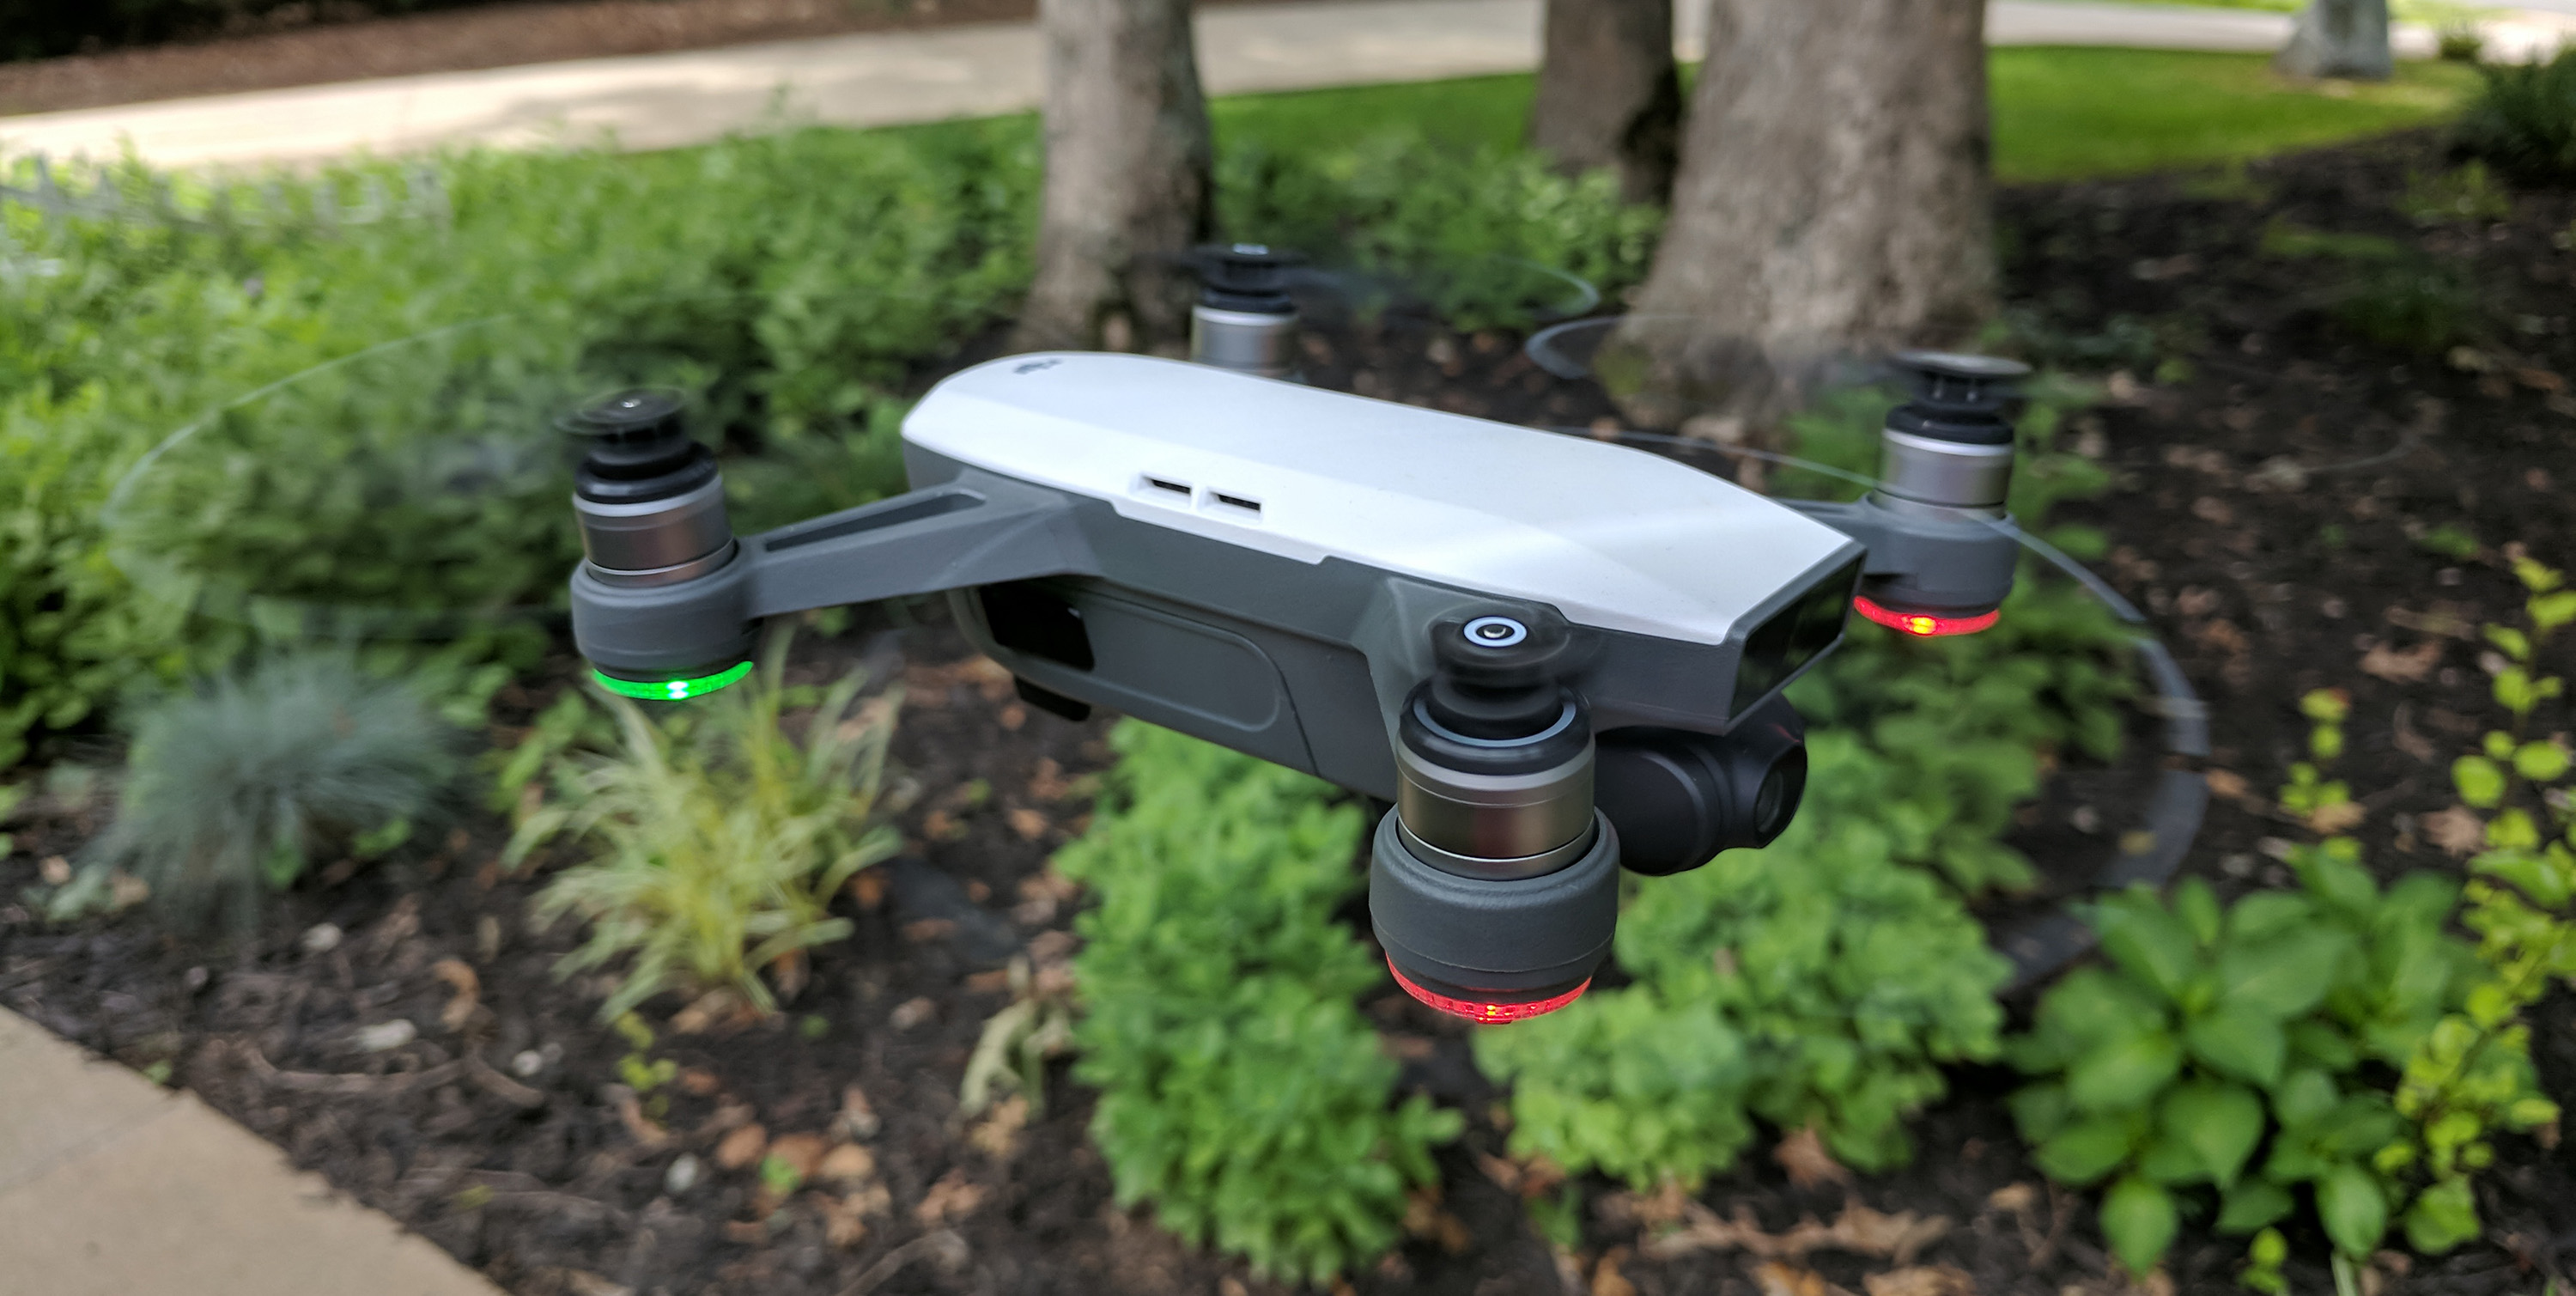 Having connecting your DJI Spark to Android? Here's how to fix it